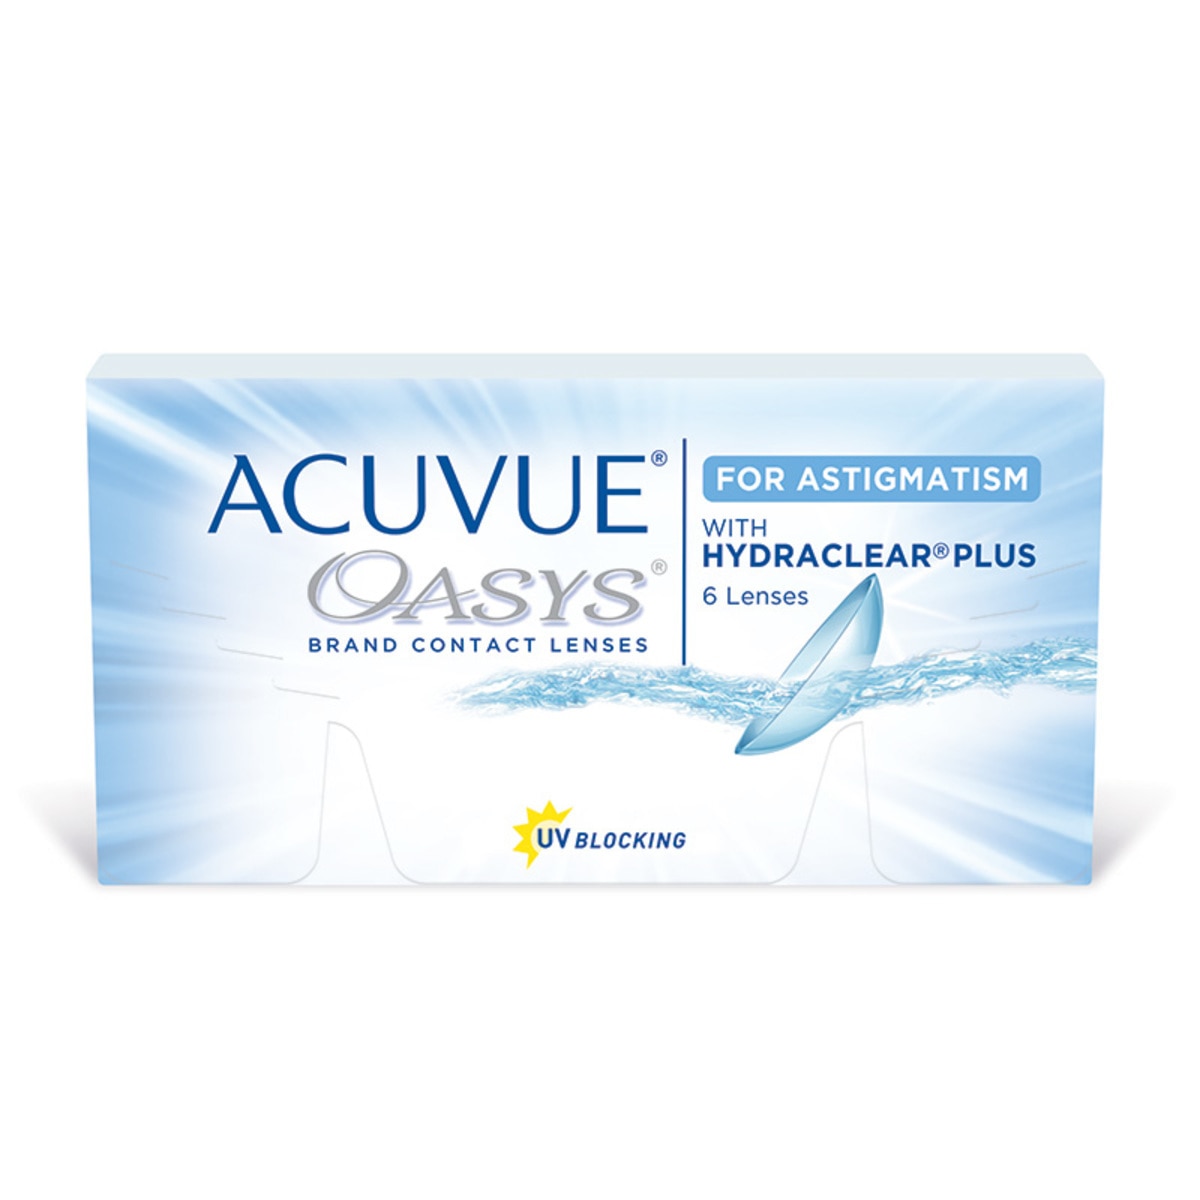 ACUVUE OASYS® con HYDRACLEAR Plus® para Astigmatismo (D -2.25, Cyl/Axis -2.25/10)